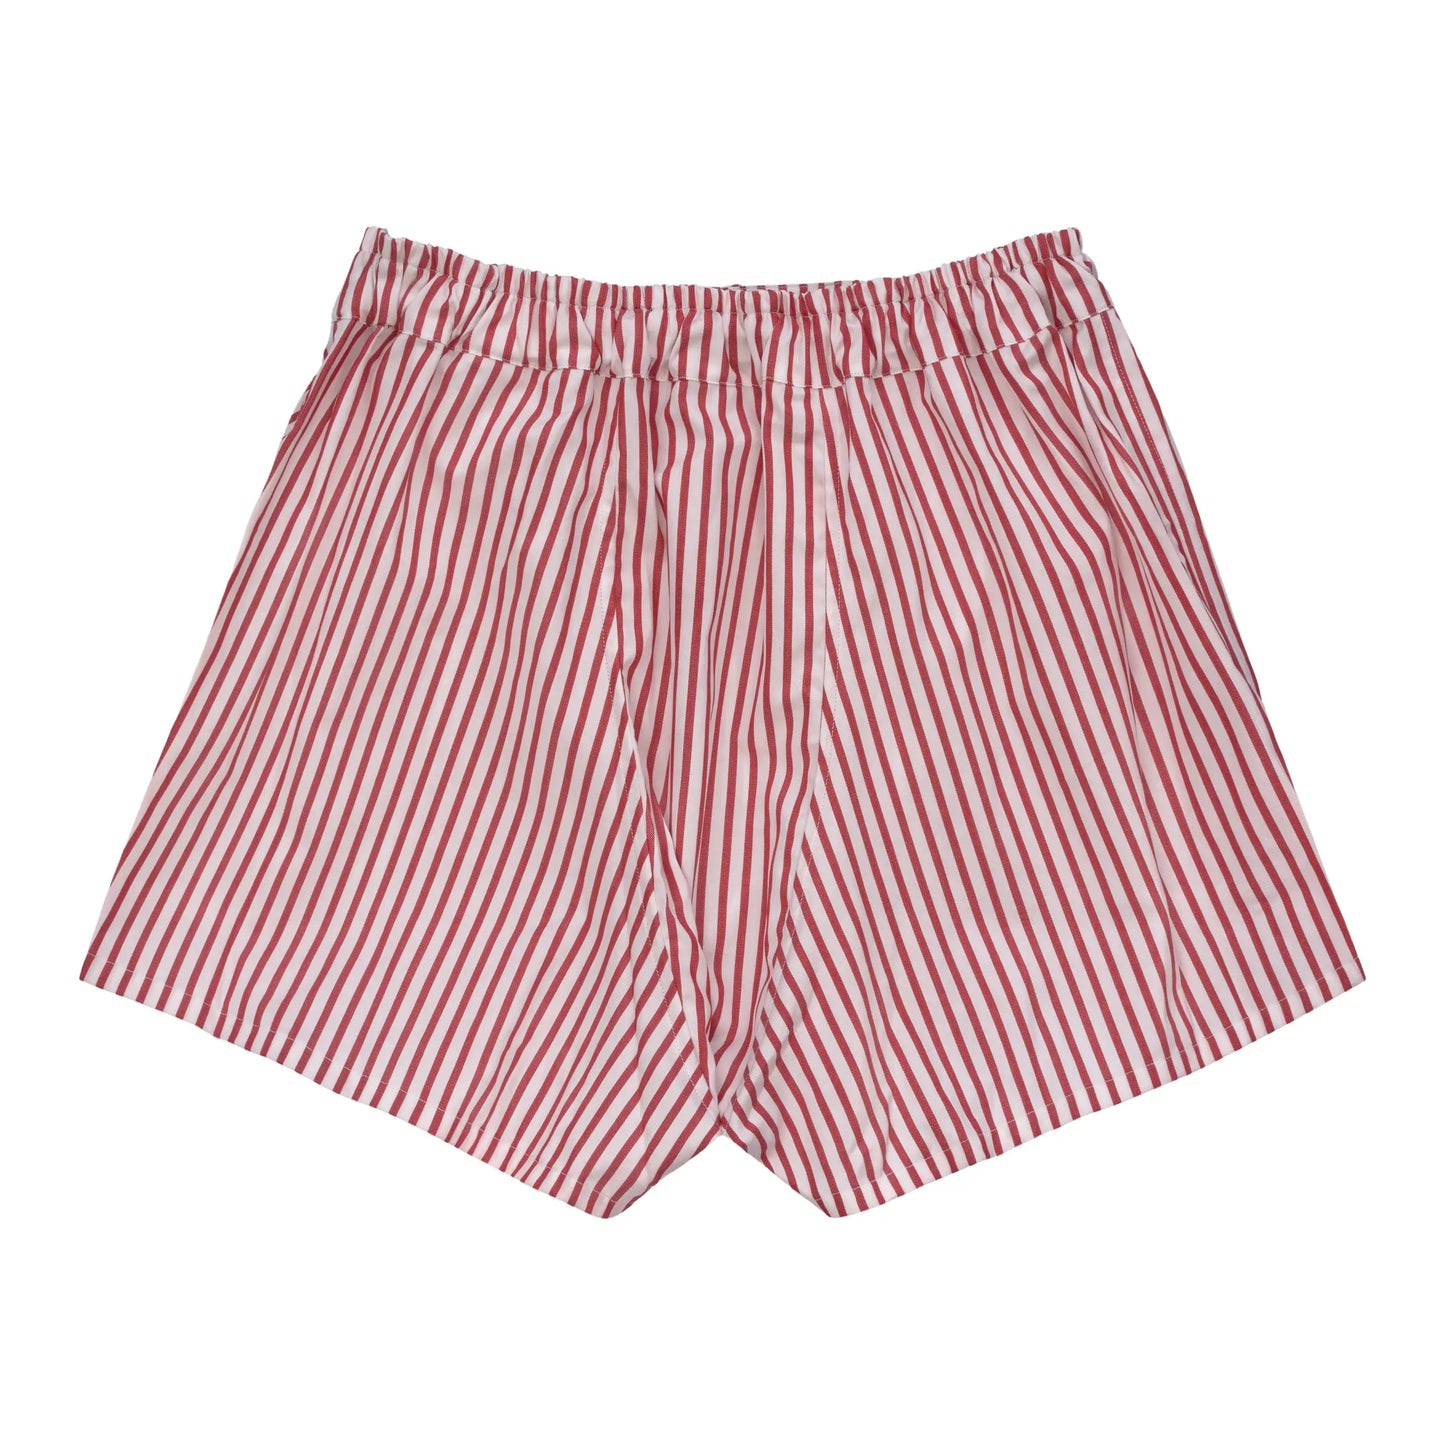 Striped Boxer Shorts in Red and White